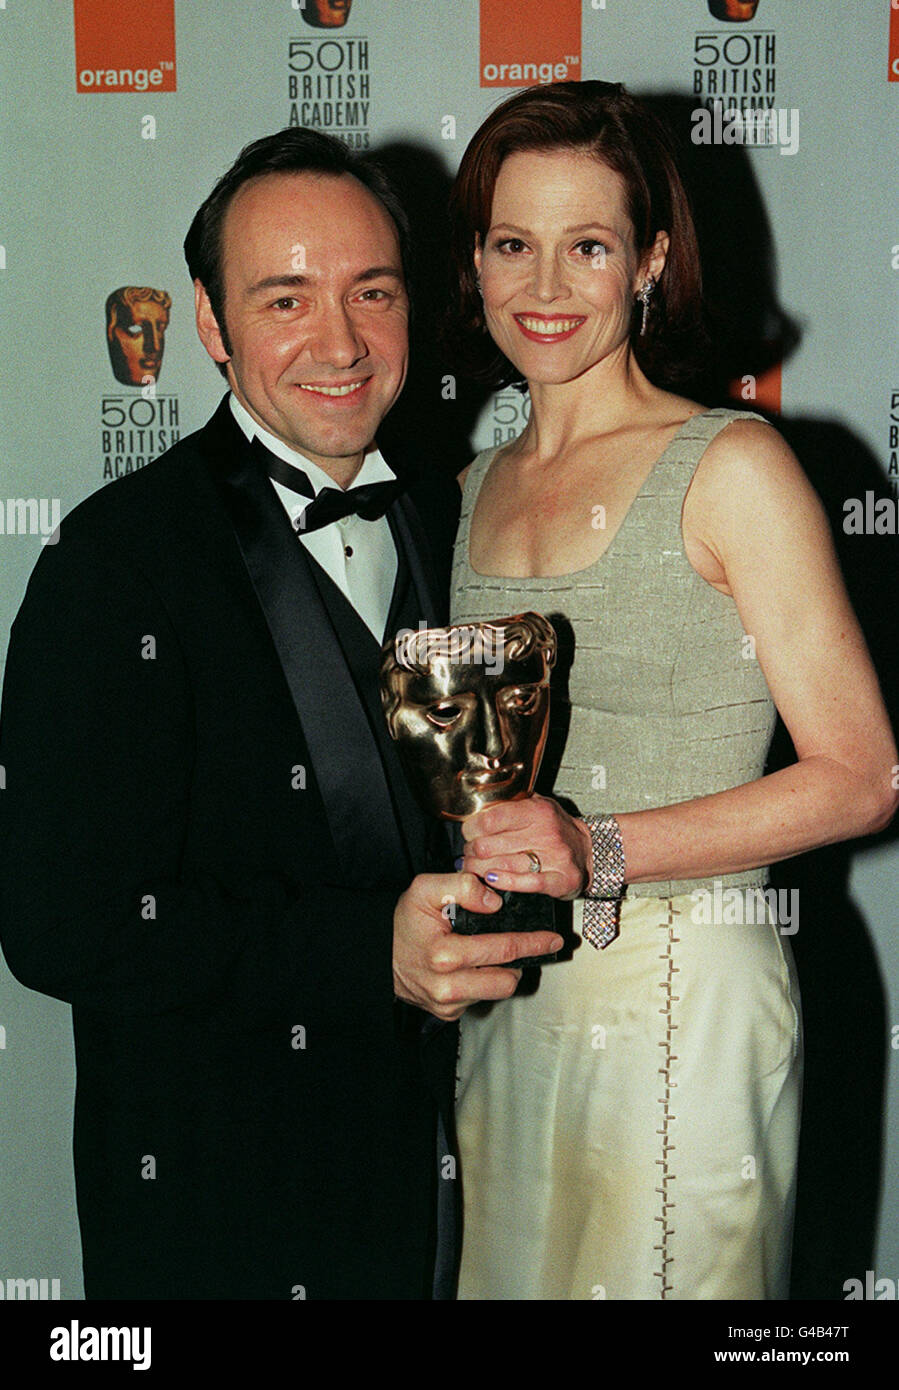 ACTRESS SIGOURNEY WEAVER, WHO WON BEST SUPPORTING ACTRESS FOR HER ROLE IN THE ICE STORM, WITH AMERICAN ACTOR KEVIN SPACEY, AT THE 50TH BAFTA AWADS IN LONDON. Stock Photo